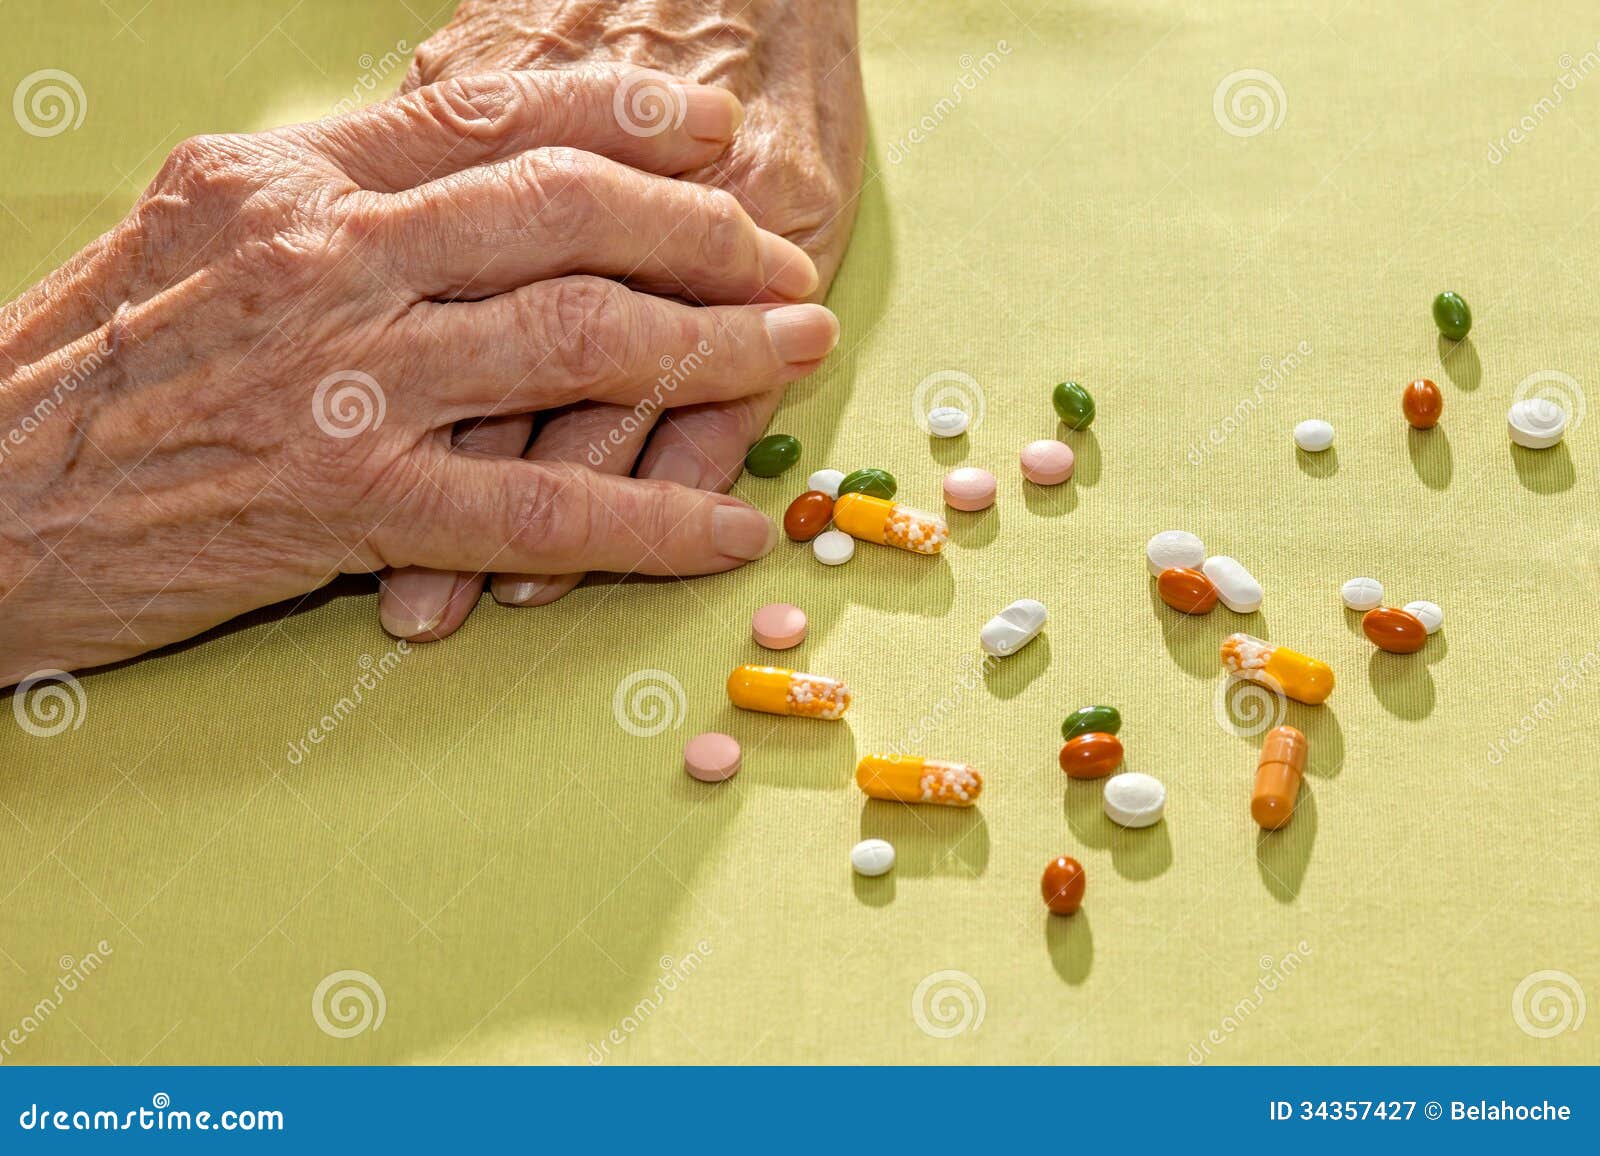 hands of an elderly lady with medication